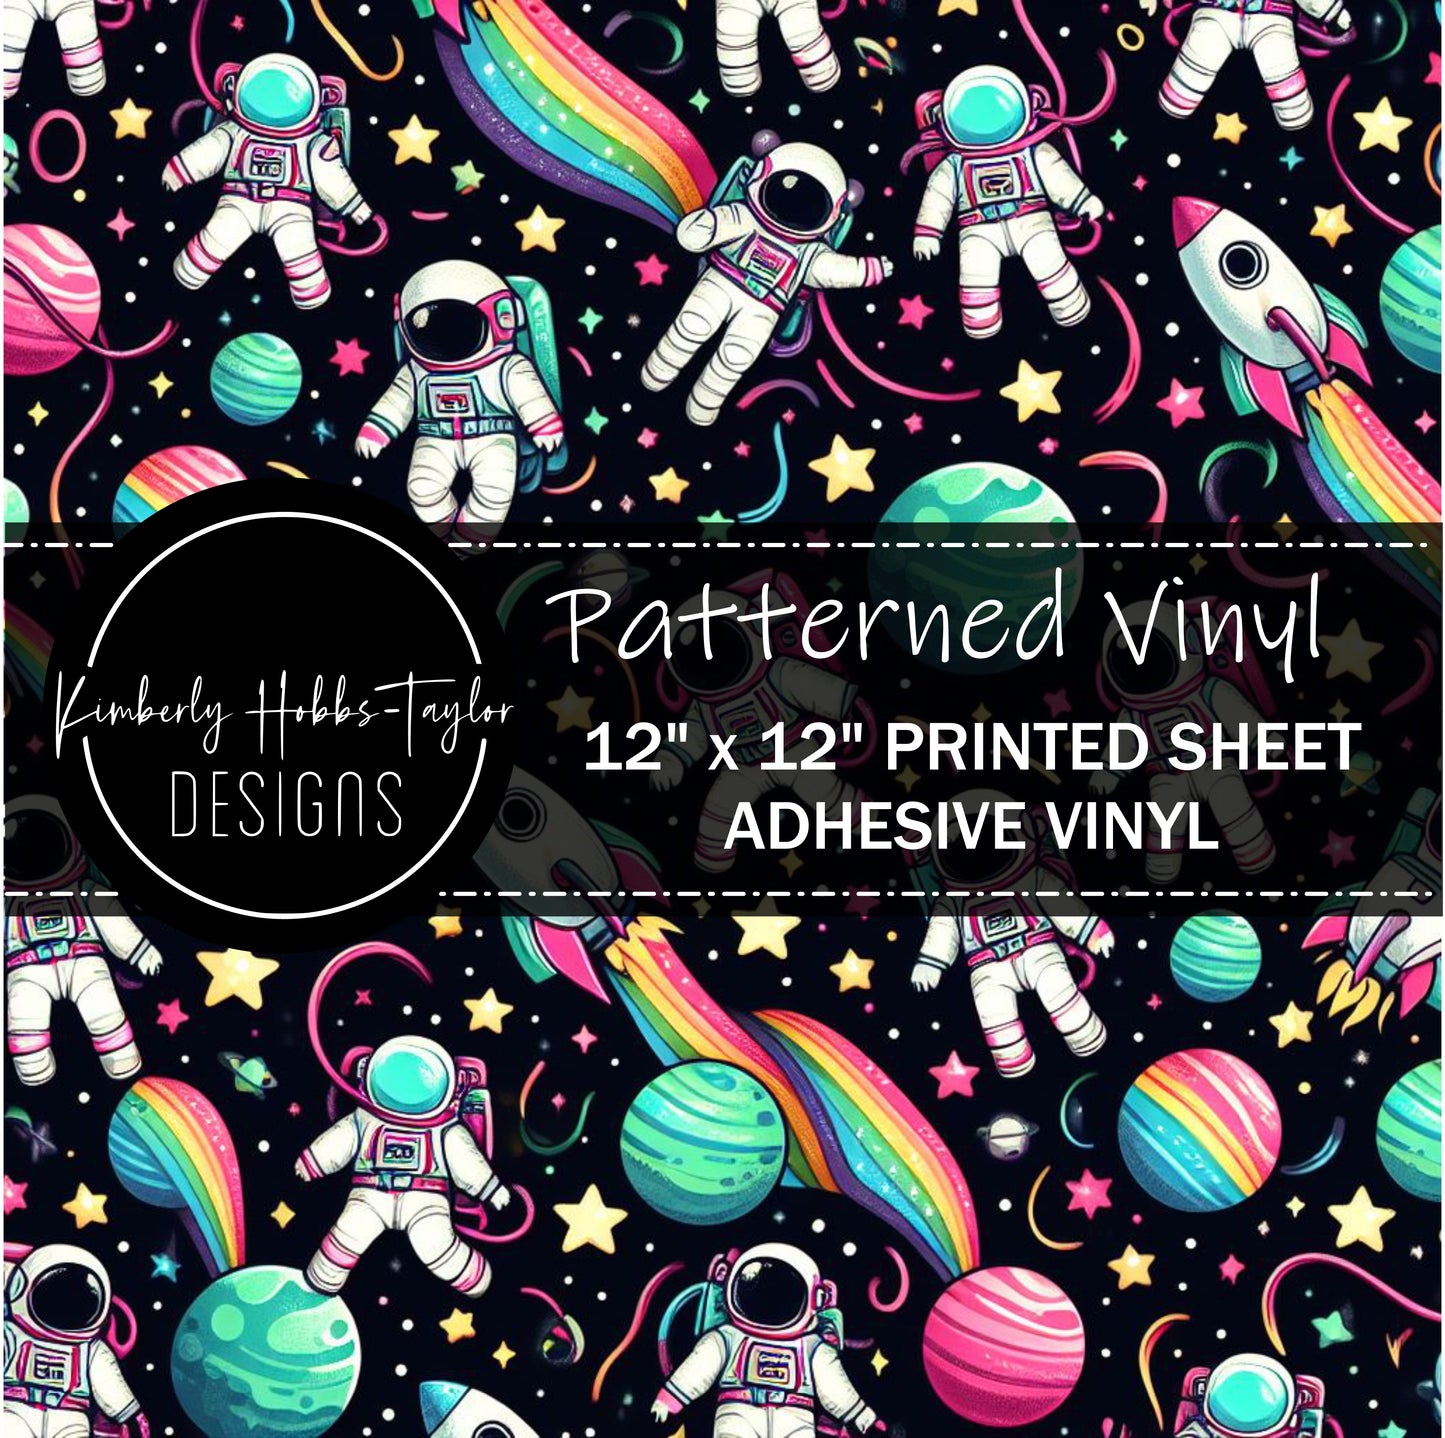 Spaced Out A - KHobbs Exclusive vinyl